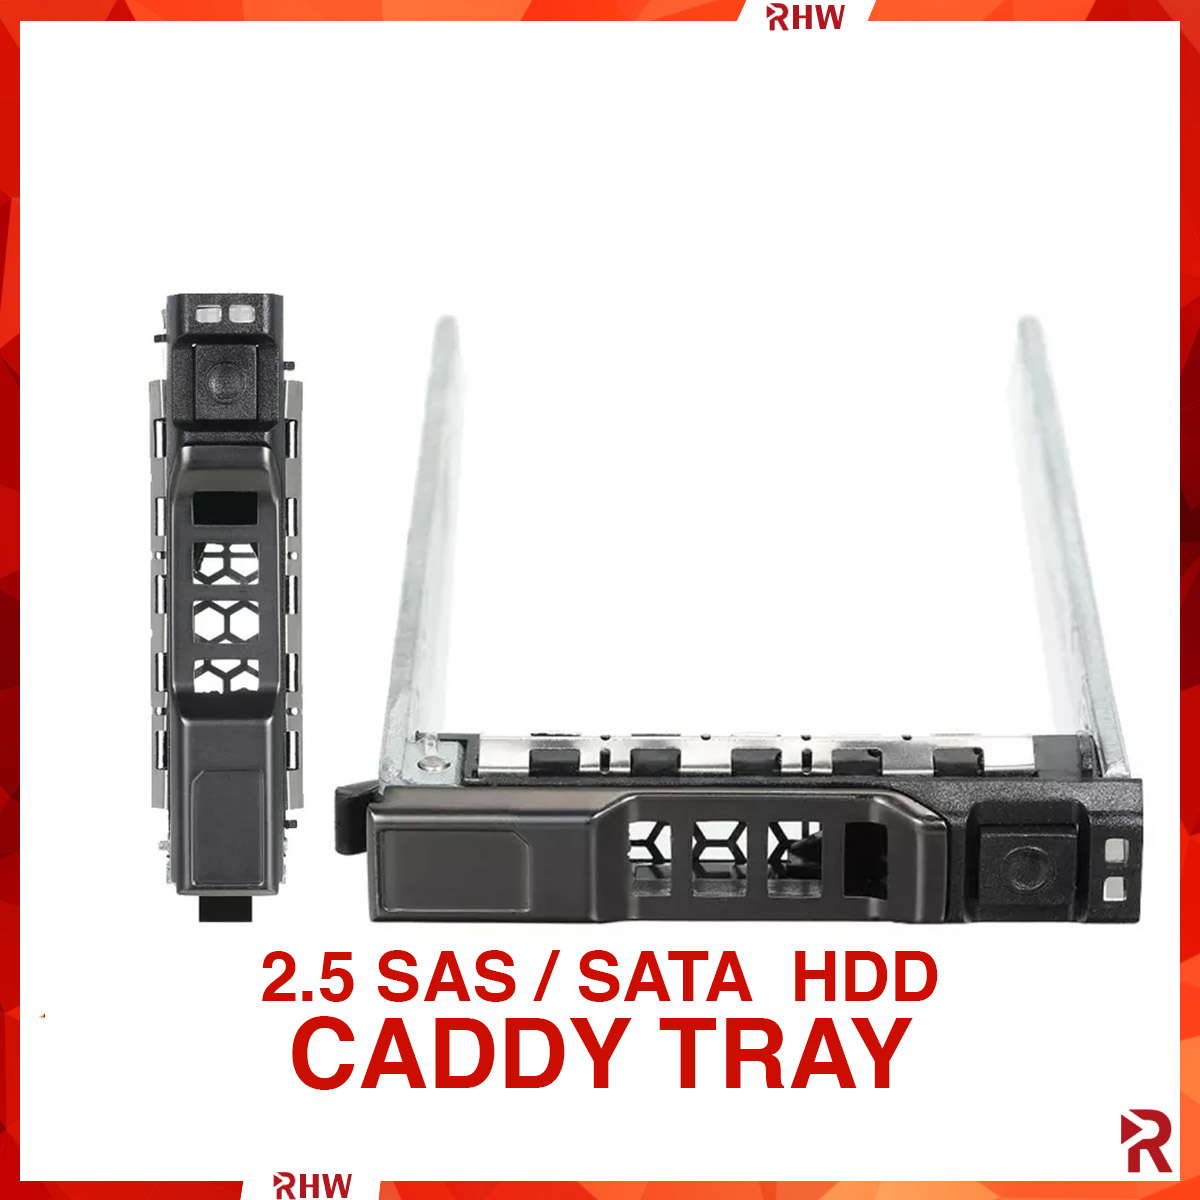 2.5 HDD Hard Drive Caddy Tray for Dell Gen 14 R640 R740